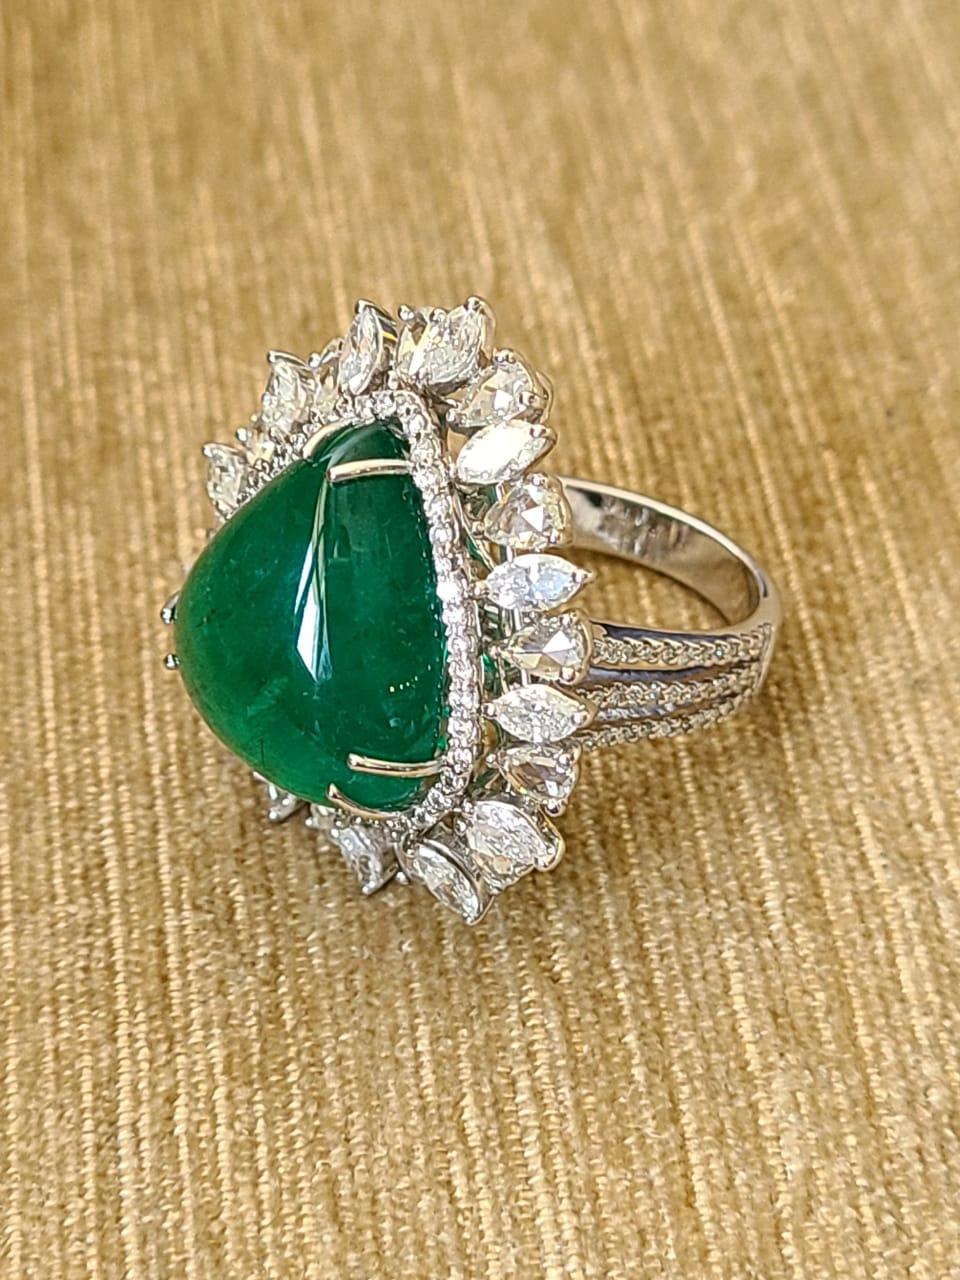 A very beautiful, one of a kind, Zambian Emerald & Diamonds Cocktail Ring/ Pendant set in 18K Gold. The Emerald, trillion shaped, weighs 16.01 carats & is of Zambian origin. The Emerald is completely natural, without any treatment. The combined